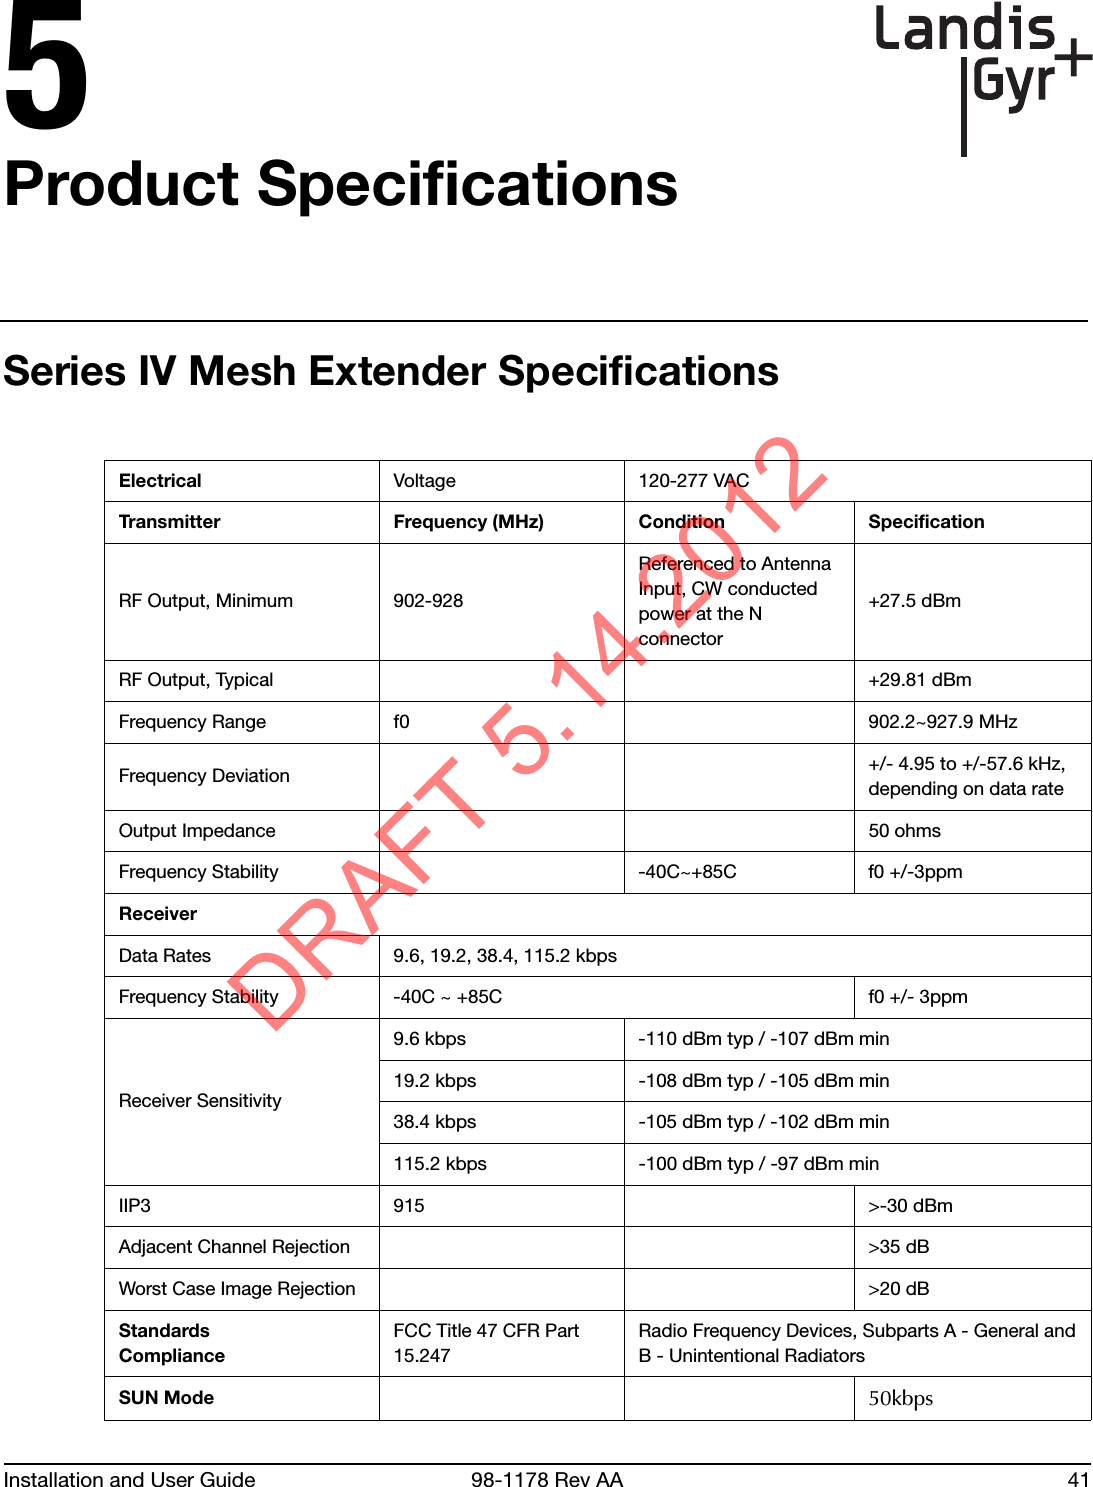 Installation and User Guide 98-1178 Rev AA 415Product SpecificationsSeries IV Mesh Extender SpecificationsElectrical Voltage 120-277 VACTransmitter Frequency (MHz) Condition SpecificationRF Output, Minimum 902-928Referenced to Antenna Input, CW conducted power at the N connector+27.5 dBmRF Output, Typical +29.81 dBmFrequency Range f0 902.2~927.9 MHz  Frequency Deviation +/- 4.95 to +/-57.6 kHz, depending on data rateOutput Impedance 50 ohmsFrequency Stability -40C~+85C f0 +/-3ppmReceiverData Rates 9.6, 19.2, 38.4, 115.2 kbpsFrequency Stability -40C ~ +85C f0 +/- 3ppmReceiver Sensitivity9.6 kbps                -110 dBm typ / -107 dBm min19.2 kbps              -108 dBm typ / -105 dBm min38.4 kbps              -105 dBm typ / -102 dBm min115.2 kbps -100 dBm typ / -97 dBm minIIP3 915 &gt;-30 dBmAdjacent Channel Rejection &gt;35 dBWorst Case Image Rejection &gt;20 dBStandardsComplianceFCC Title 47 CFR Part 15.247Radio Frequency Devices, Subparts A - General andB - Unintentional Radiators SUN Mode 50kbpsDRAFT 5.14.2012